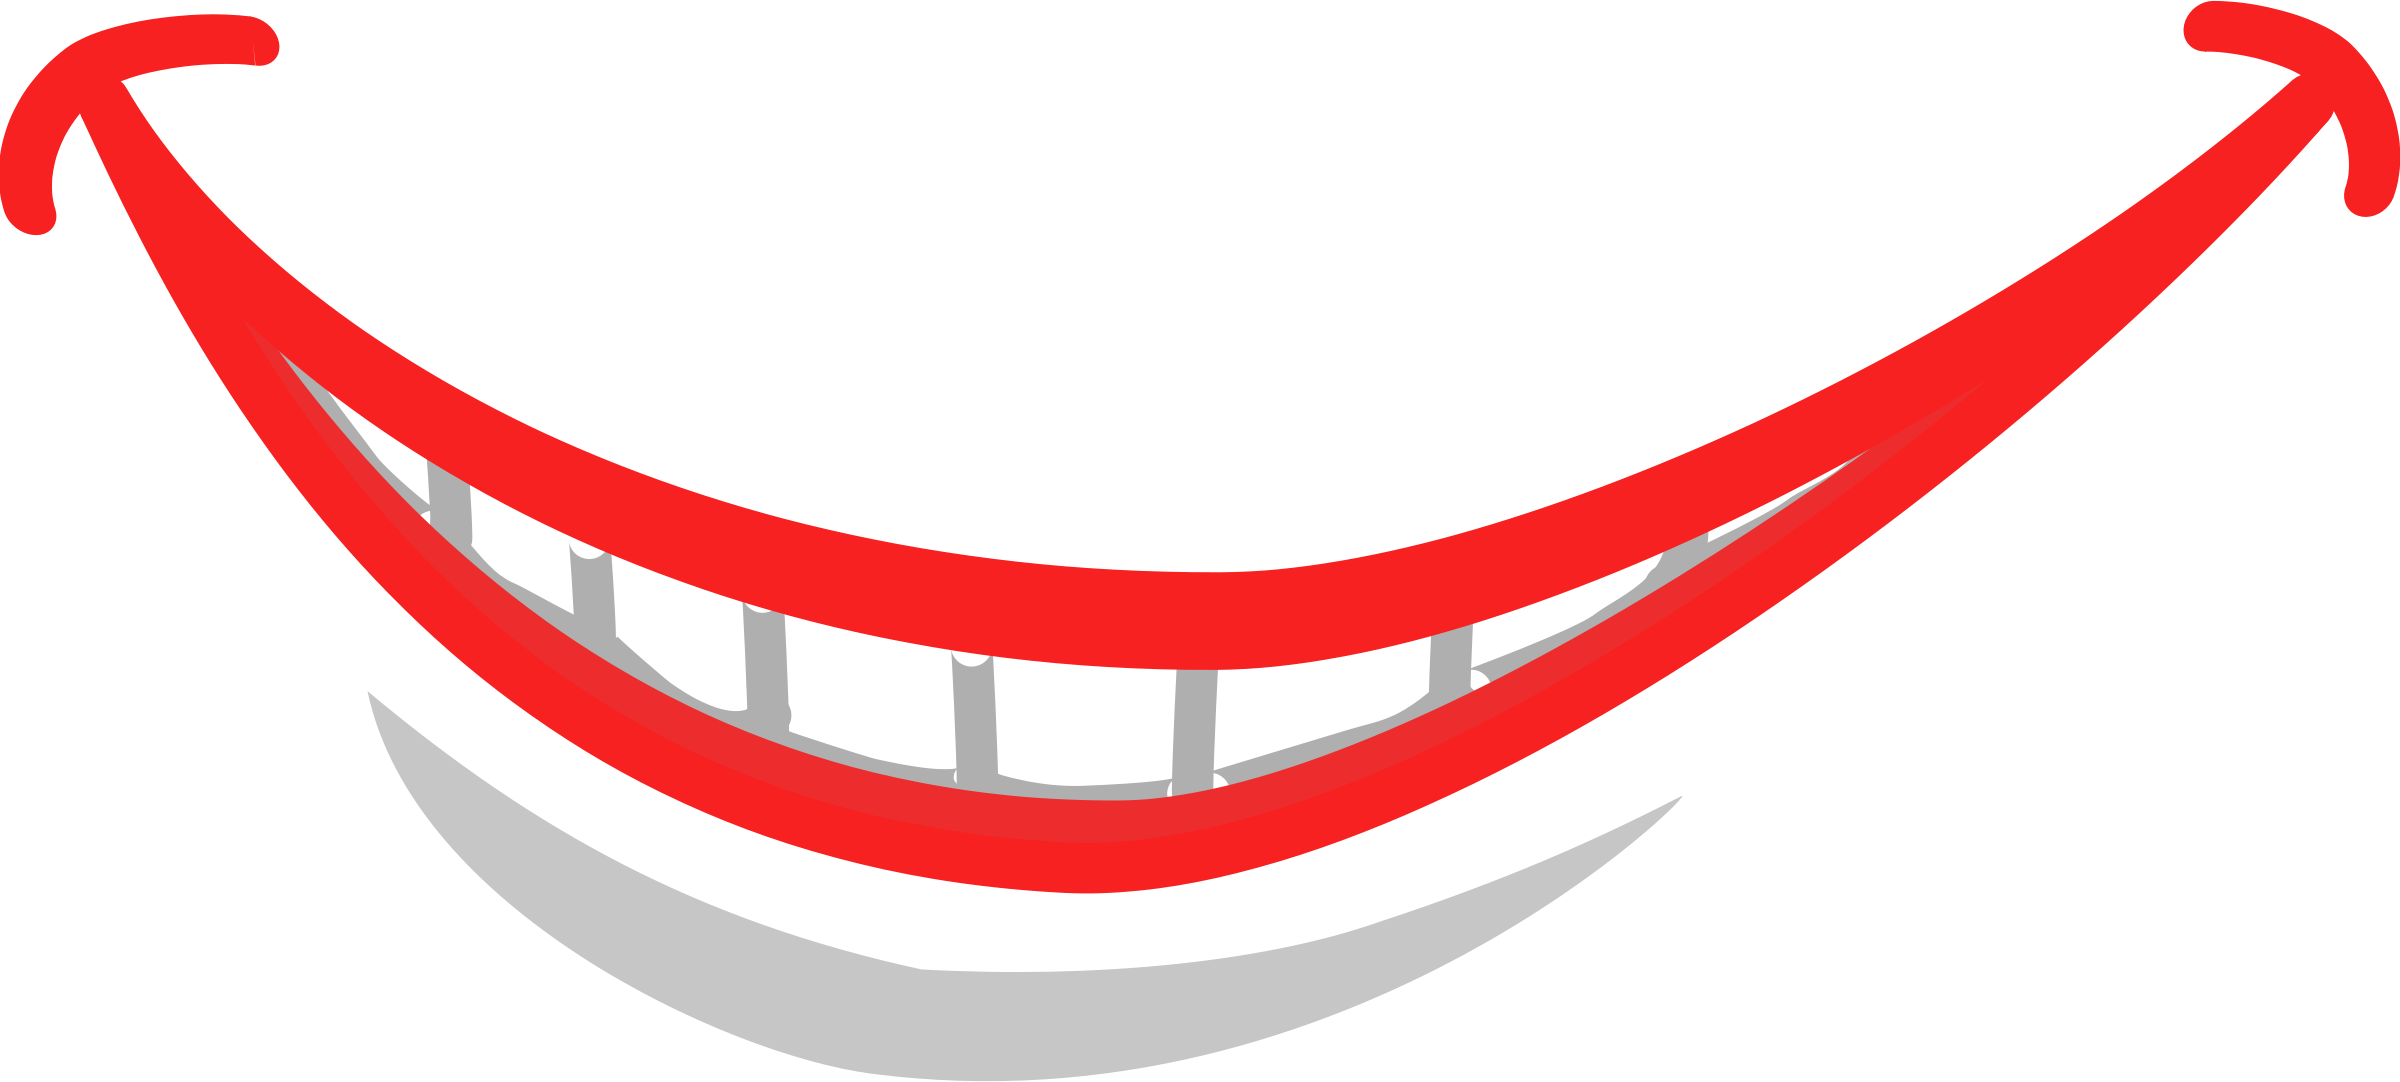 Cartoon Mouth Smile - Clipart library